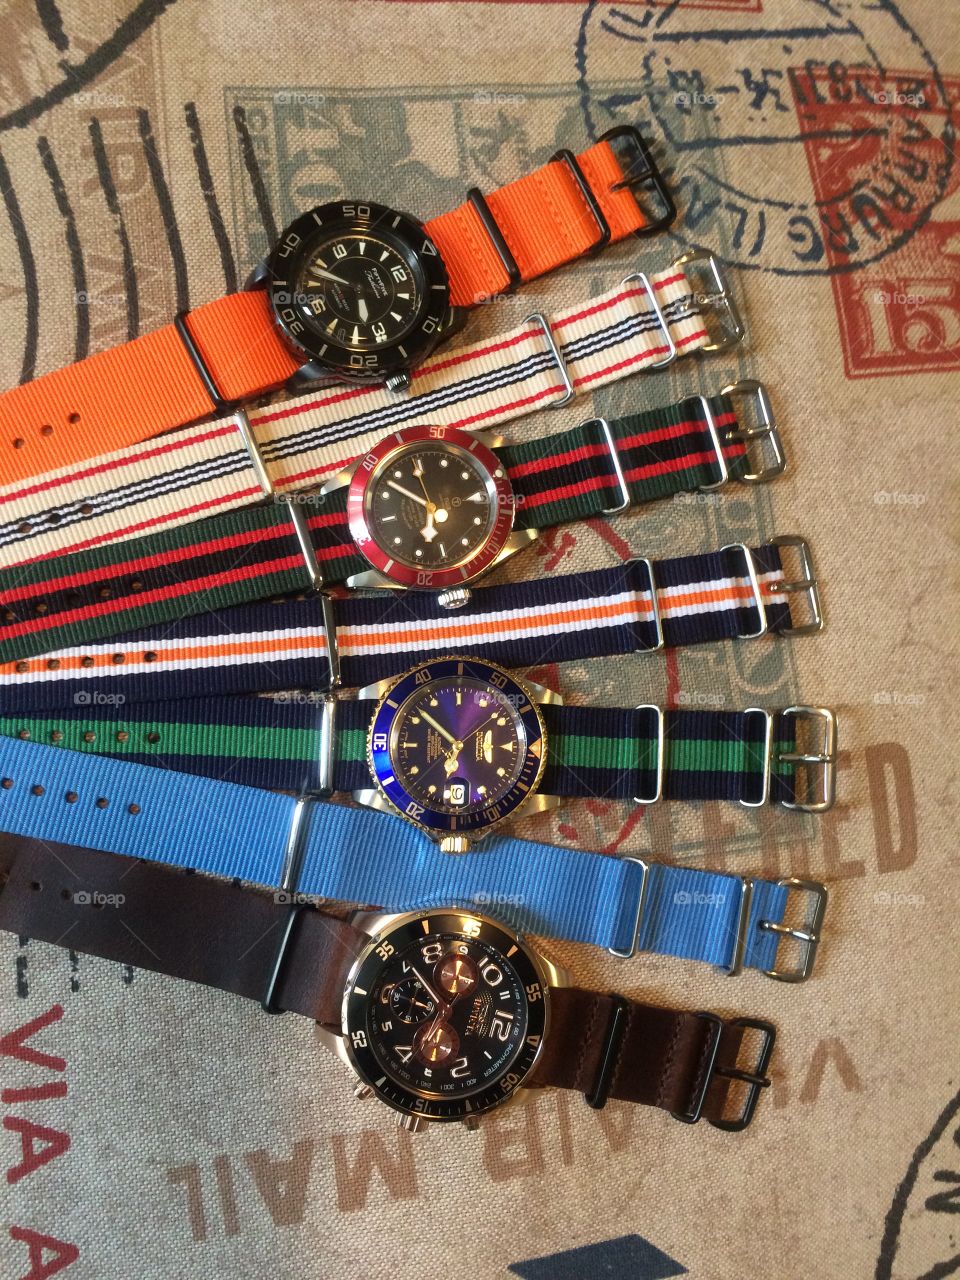 Watches and straps